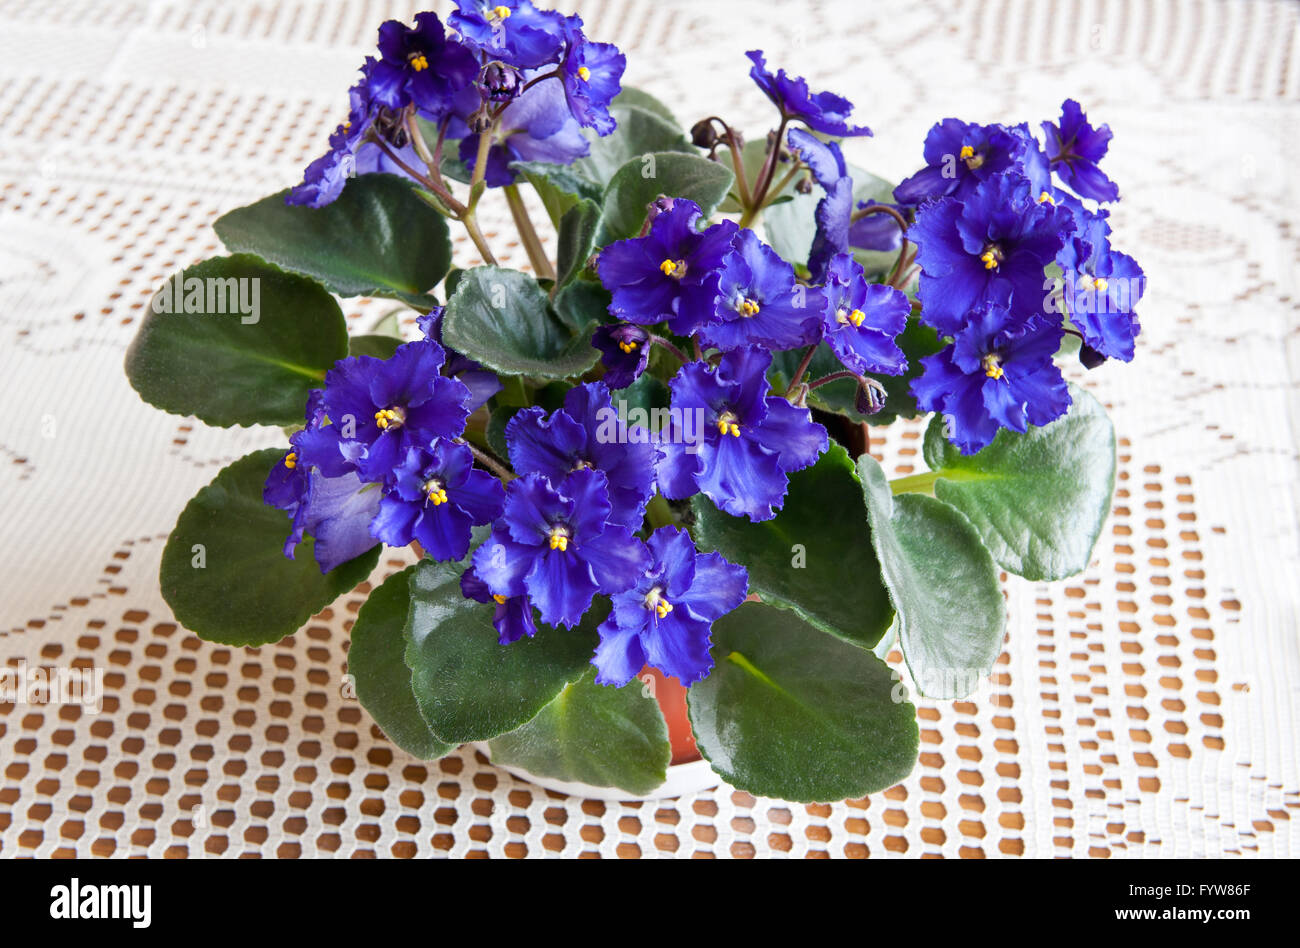 Blooming purple African violet, Saintpaulia Ionantha flowering plant in the Gesneriaceae family, household plant bunch of flower Stock Photo